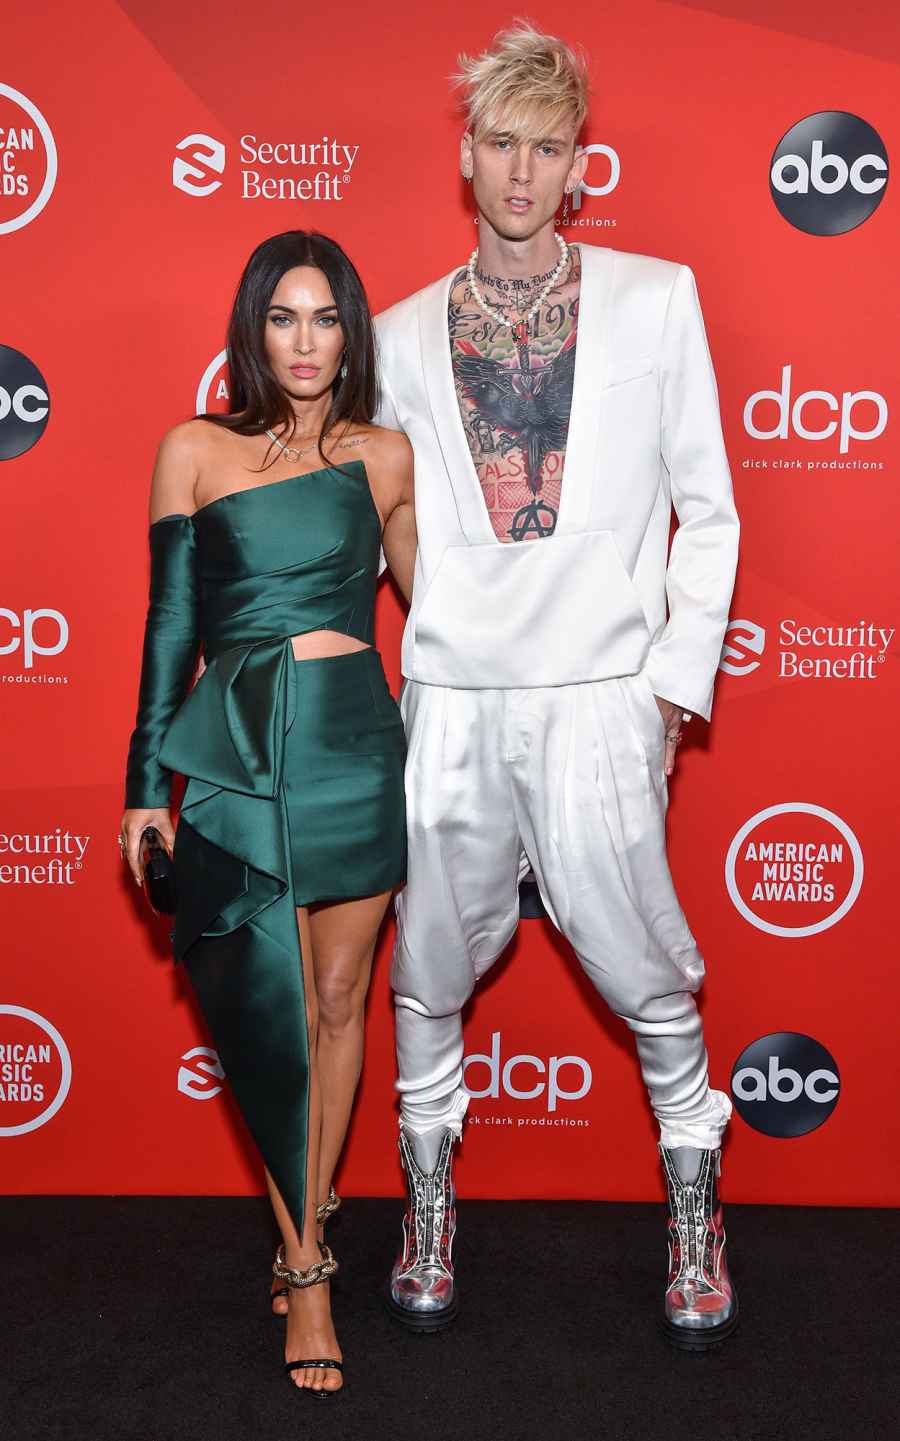 Megan Fox and Machine Gun Kelly’s Relationship Timeline, From Costars to Couple